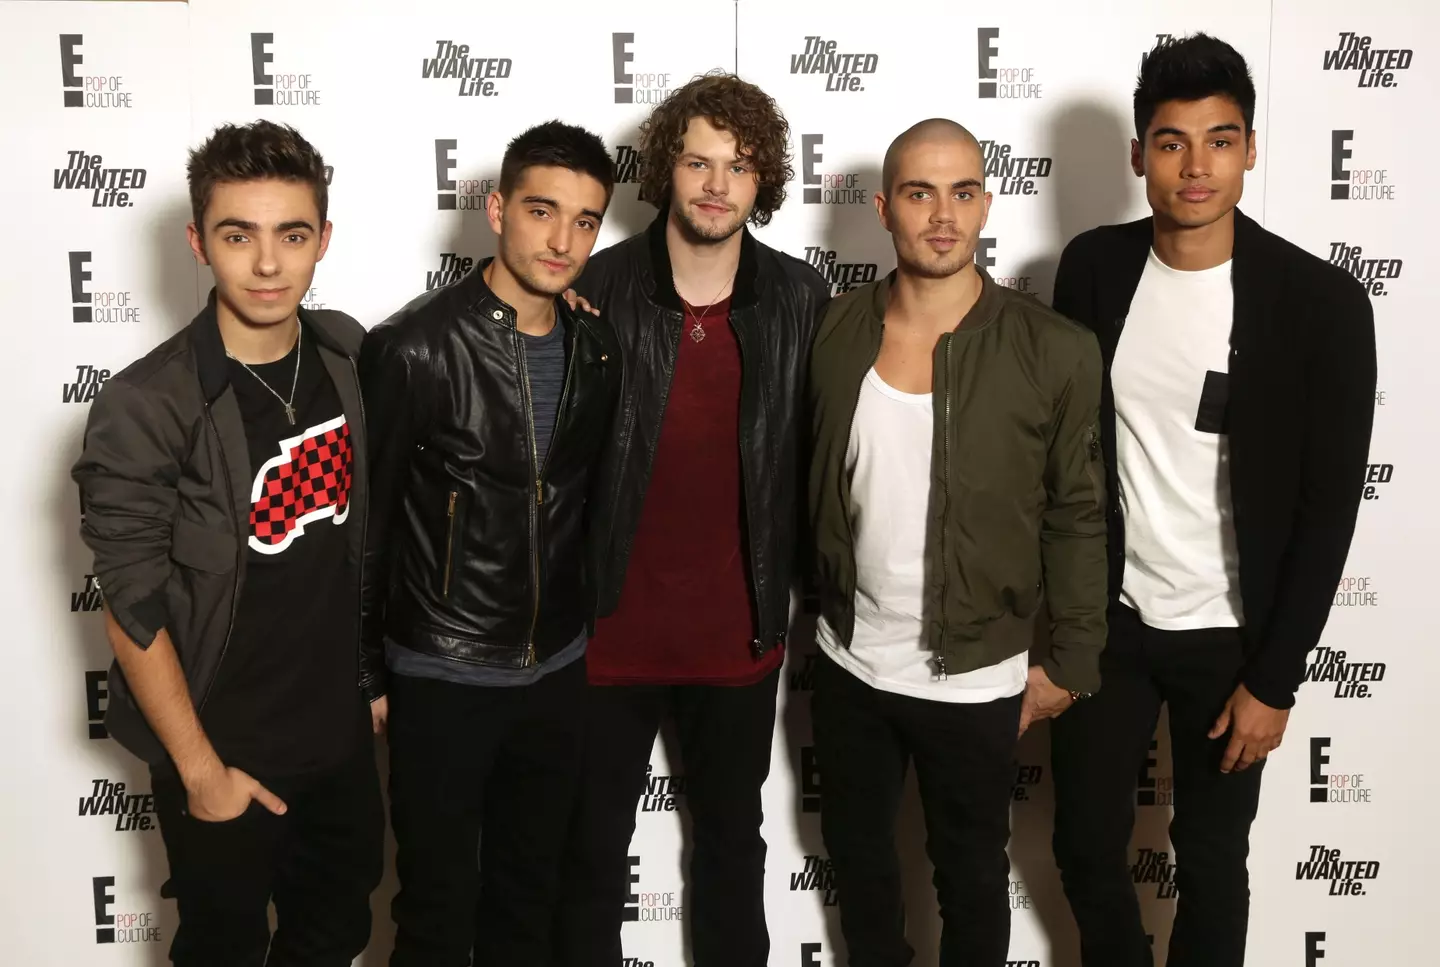 The Wanted in 2013. (